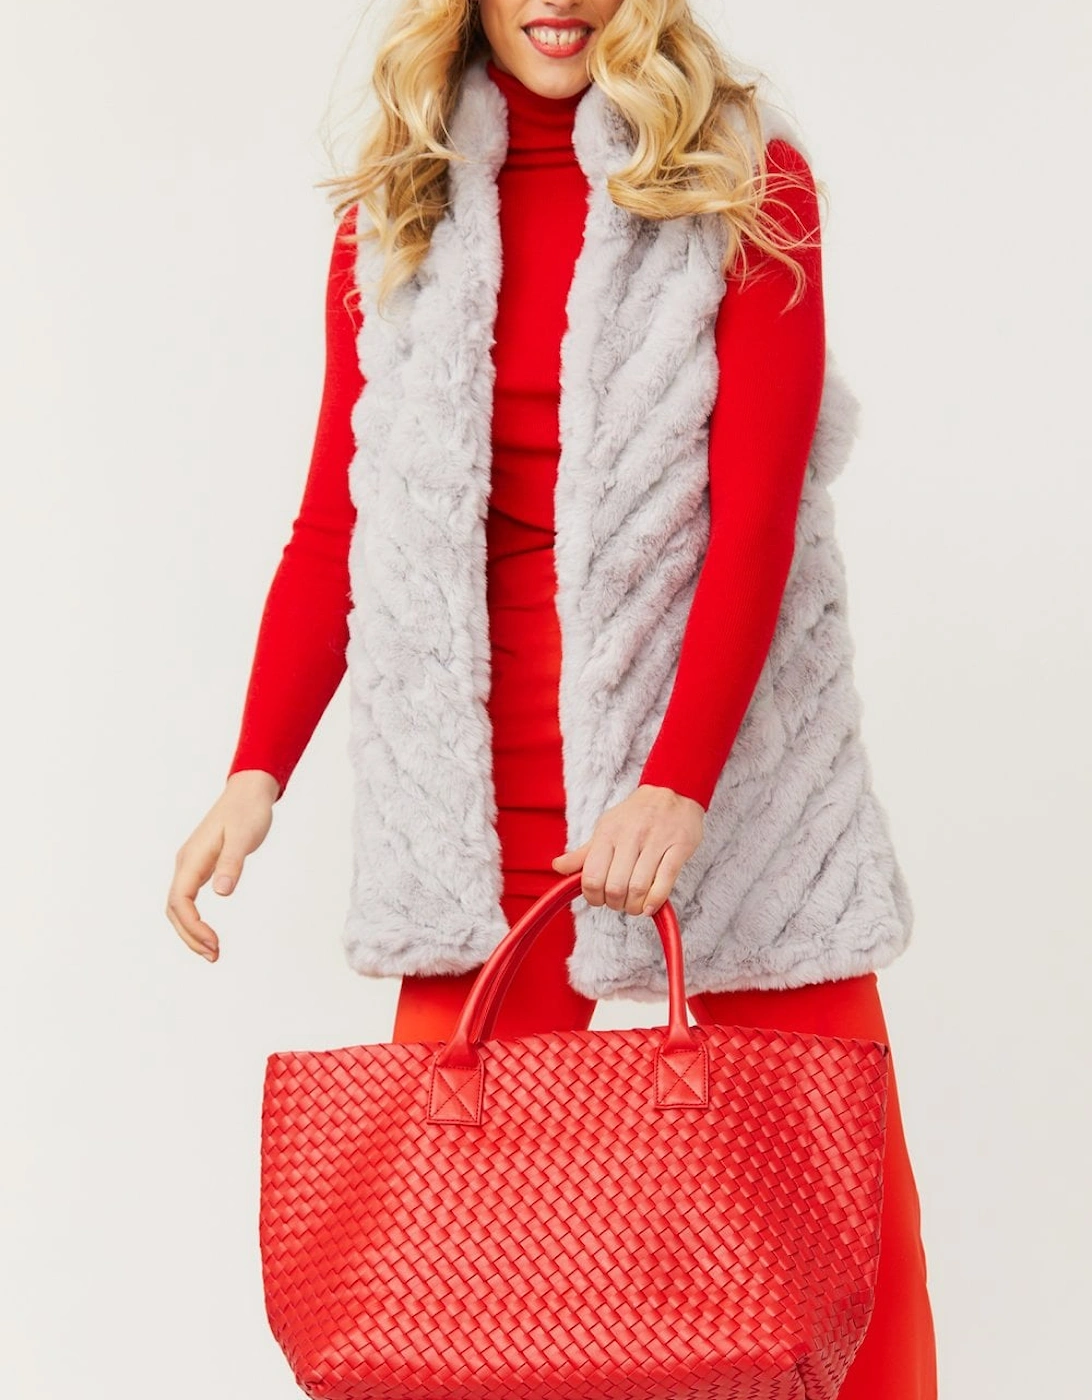 Red Woven Metallic Tote Bag Eco Leather